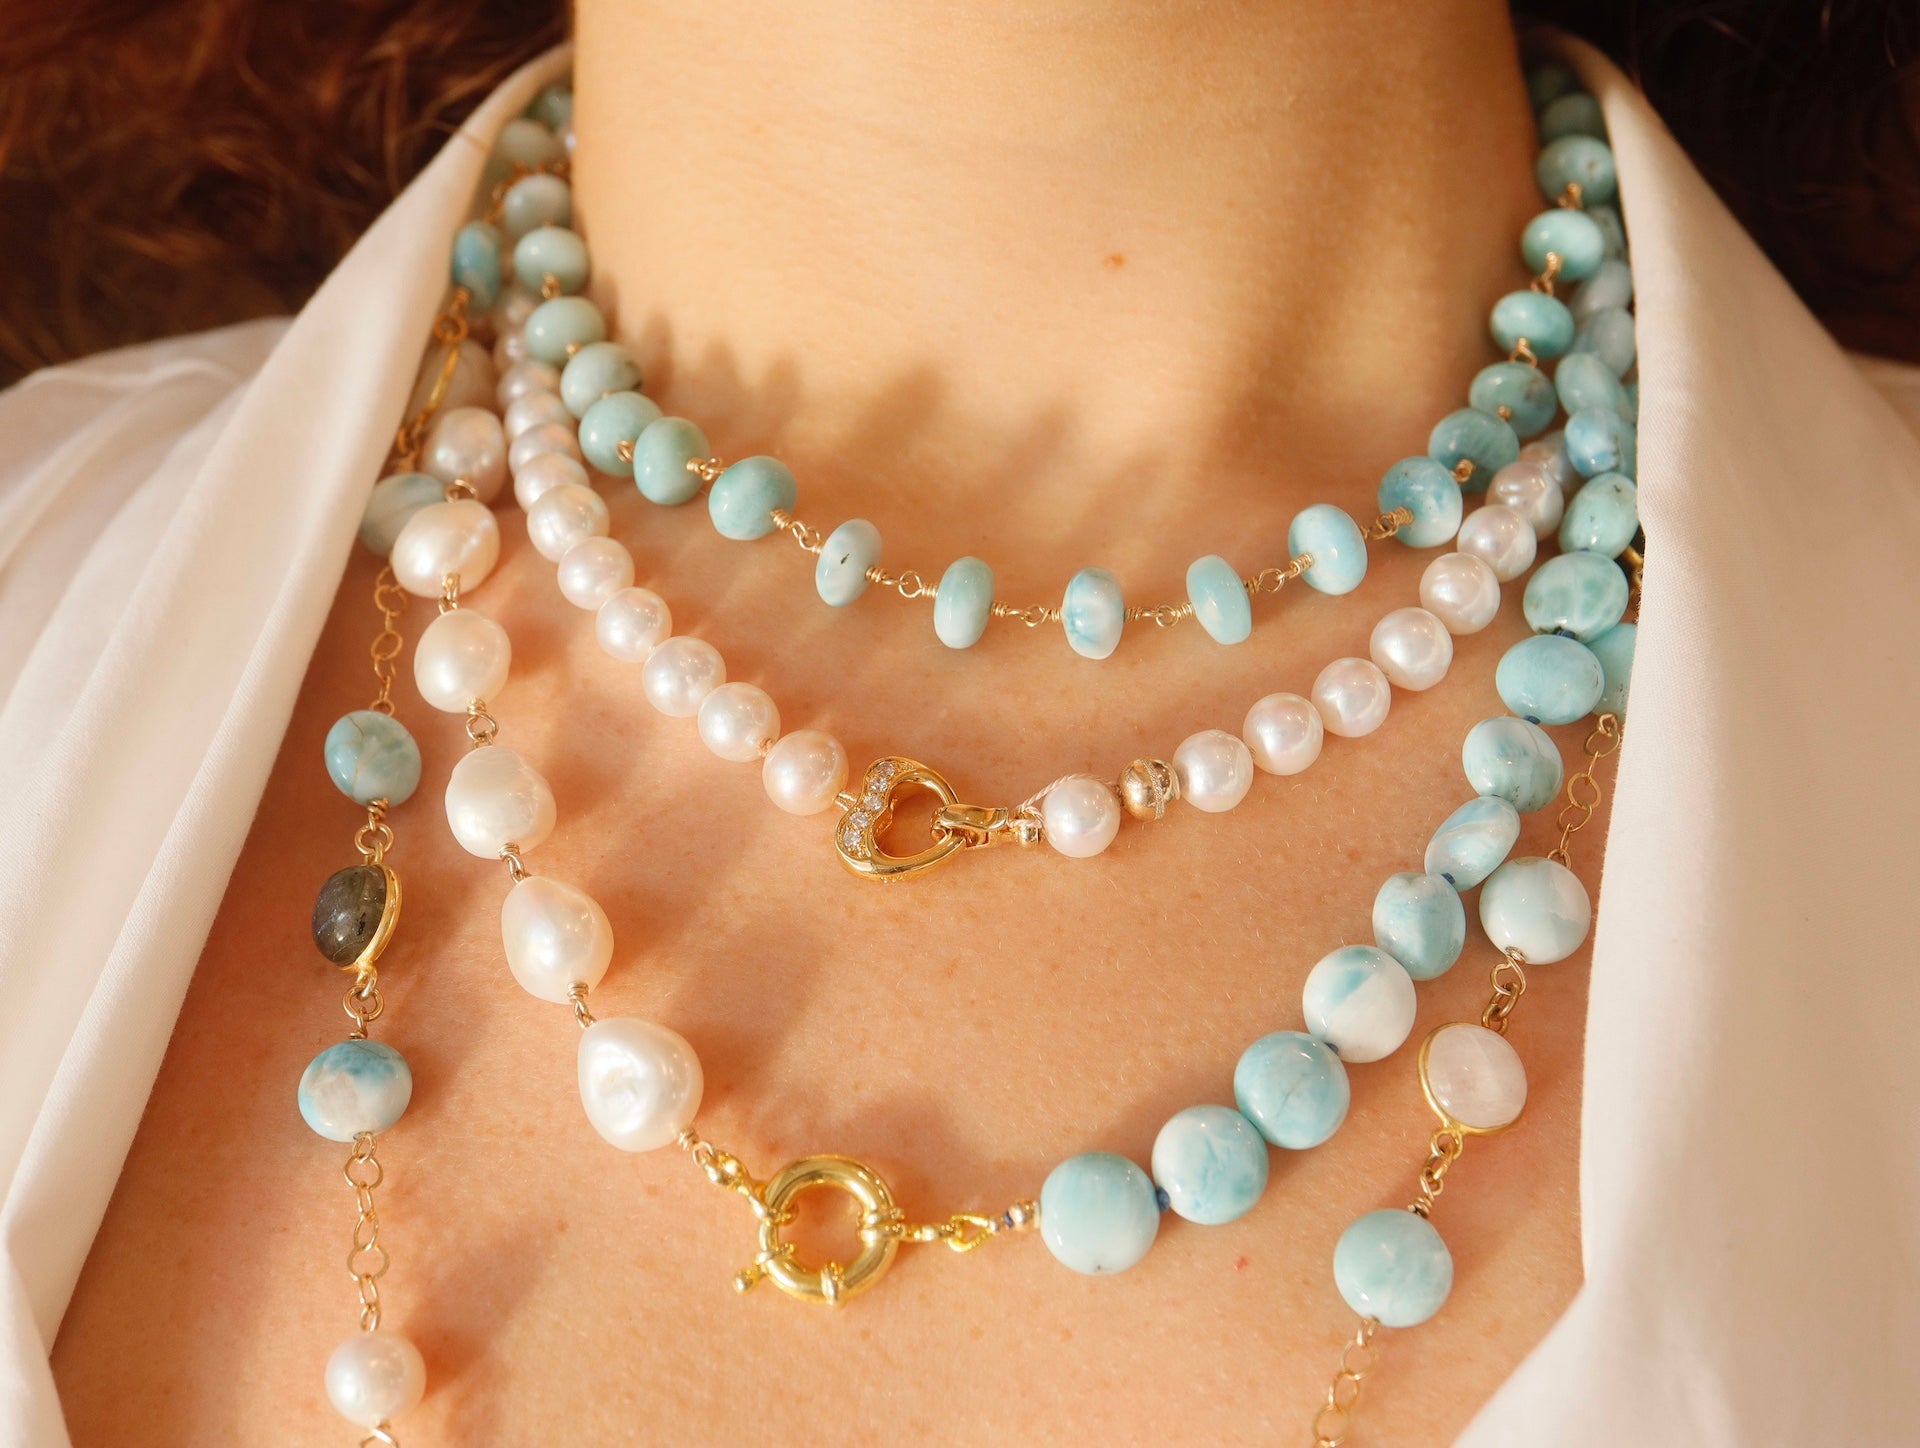 Pearl Necklace with Heart Clasp